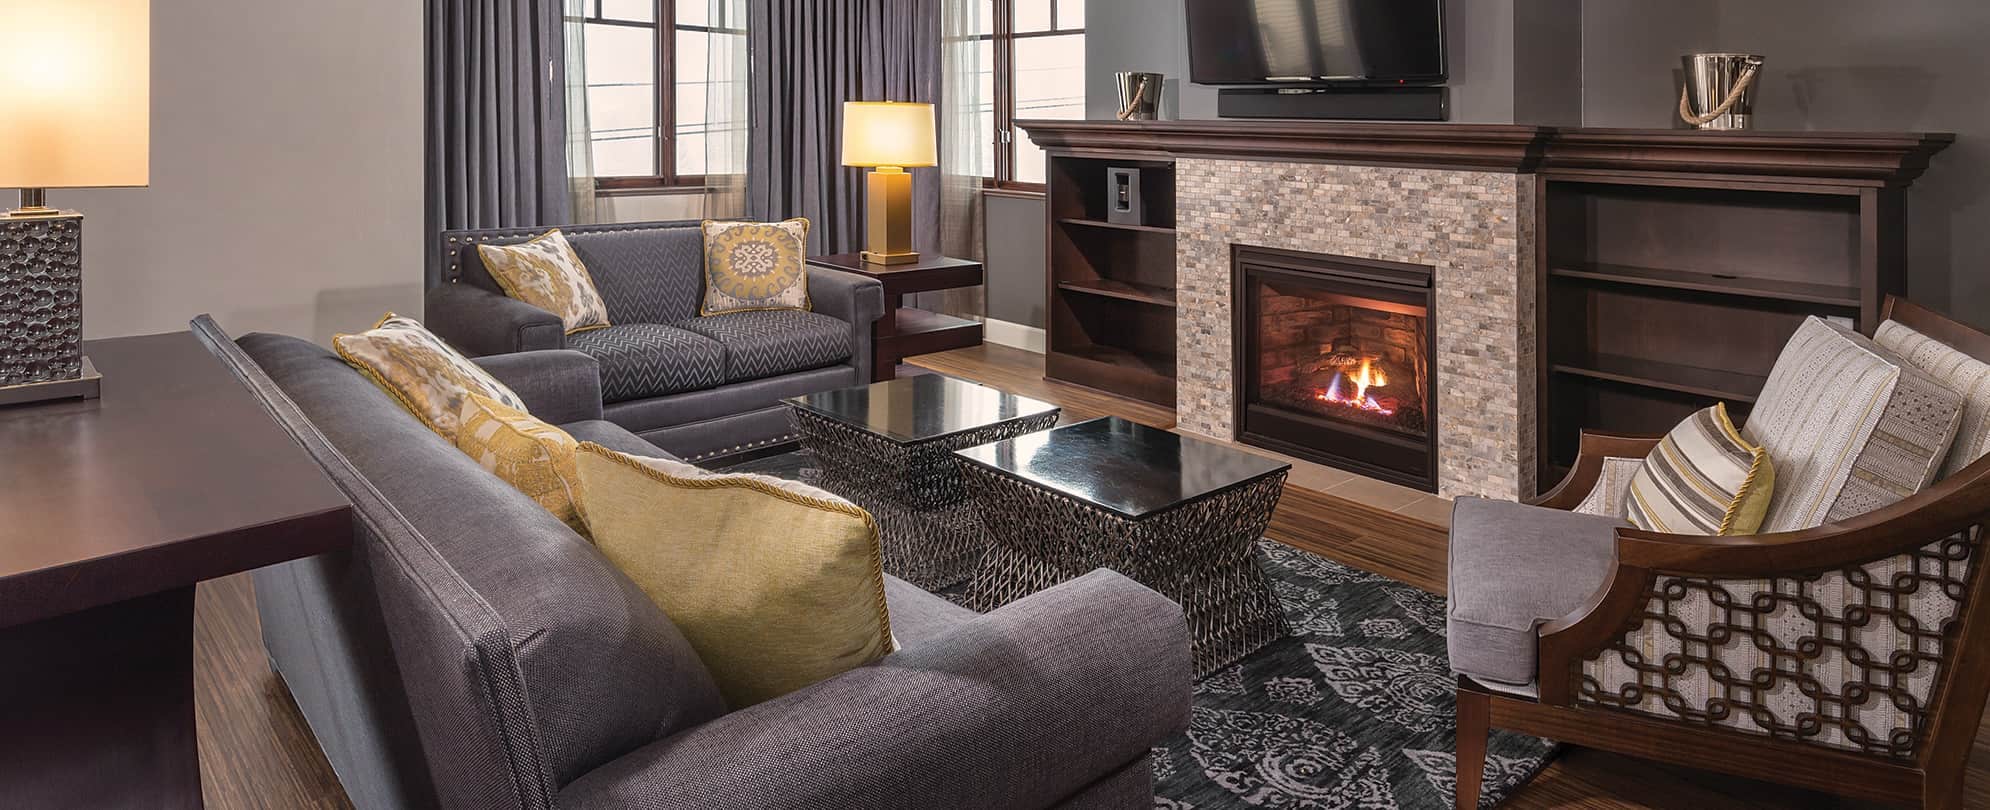 Couches and a glass-top tables in front of a burning fireplace at Club Wyndham Park City, a timeshare resort in Utah.